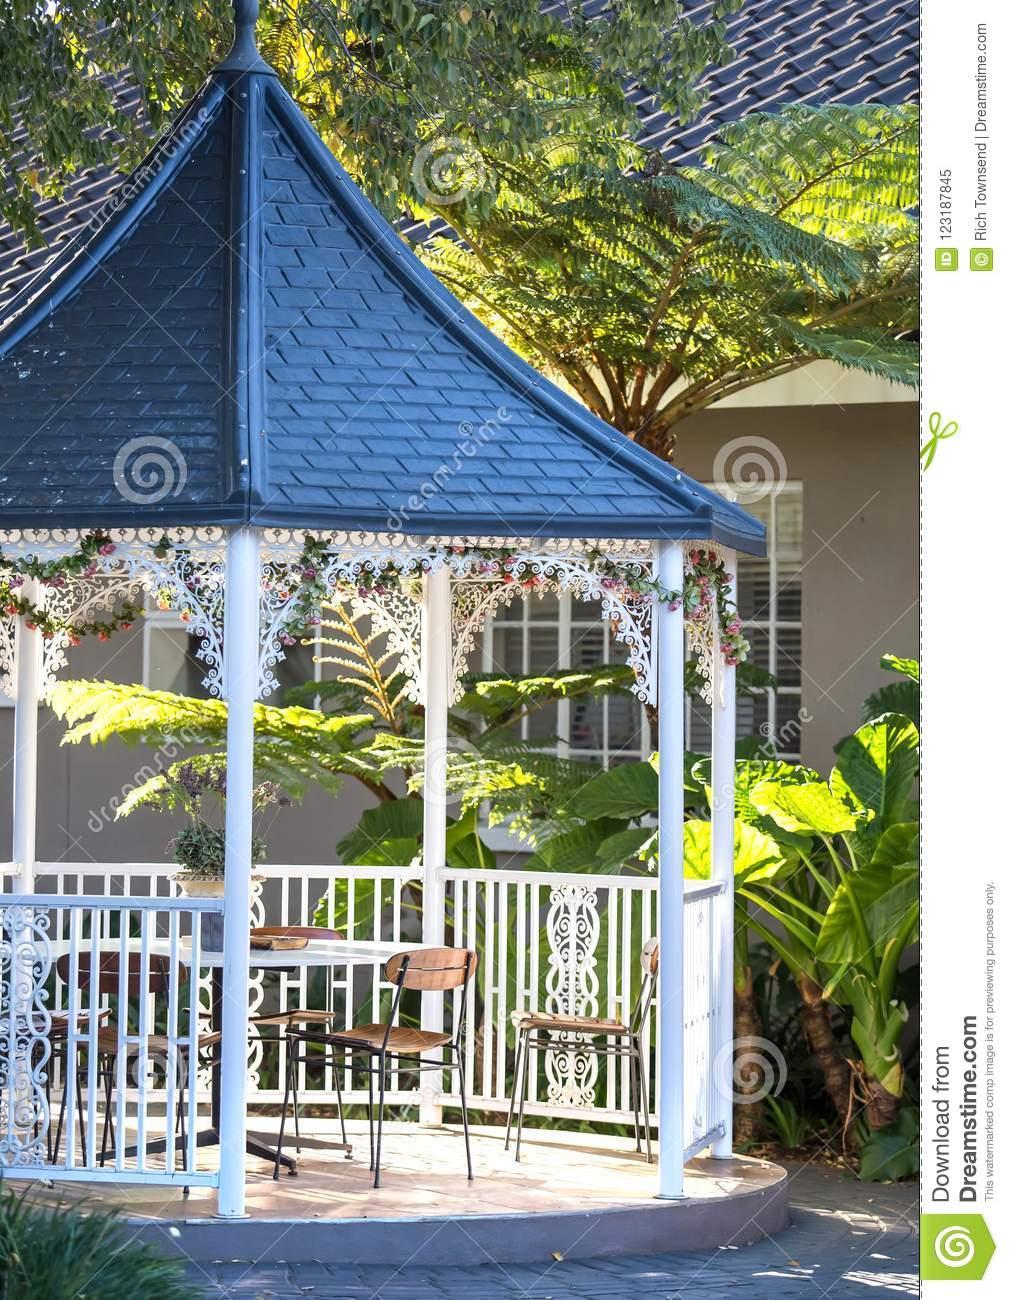 Garden Feature With Tables And Chairs Editorial Image intended for measurements 1009 X 1300